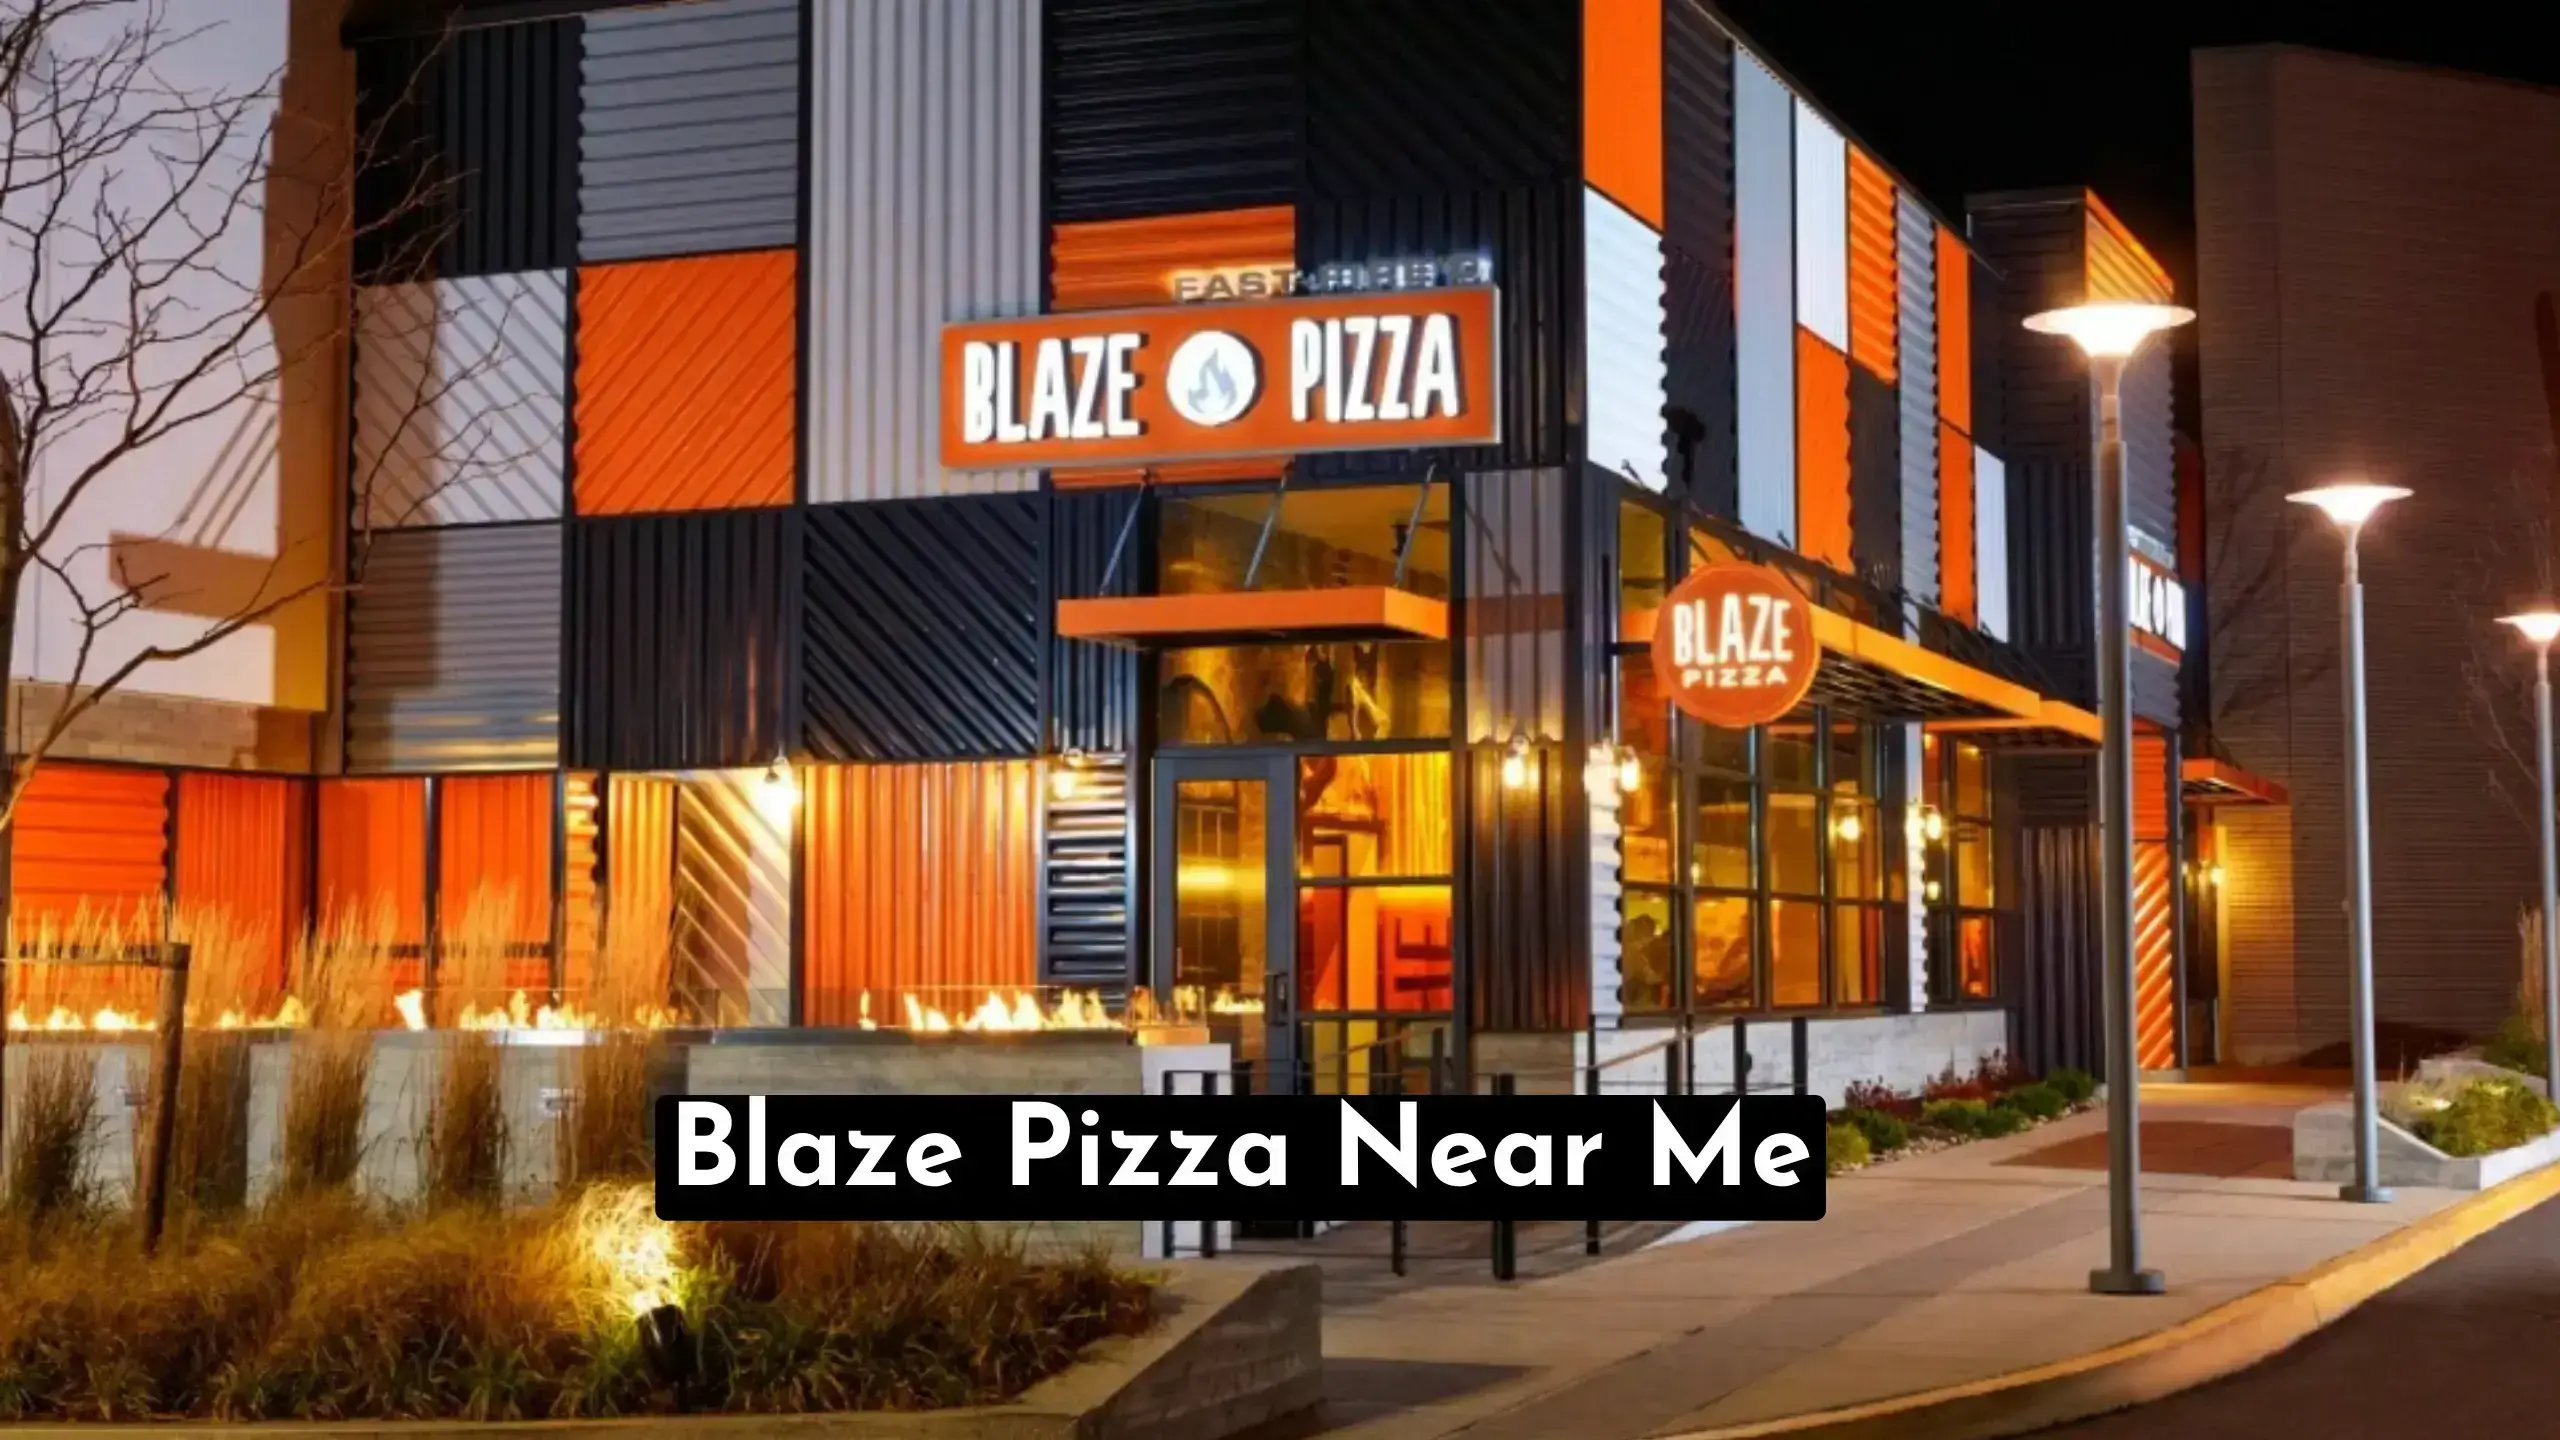 A Quick Way To Locate Blaze Pizza Near Me | Also Find What's Special Pizza's You Can Try There With Taste Description & Important FAQs | open-near-me.com